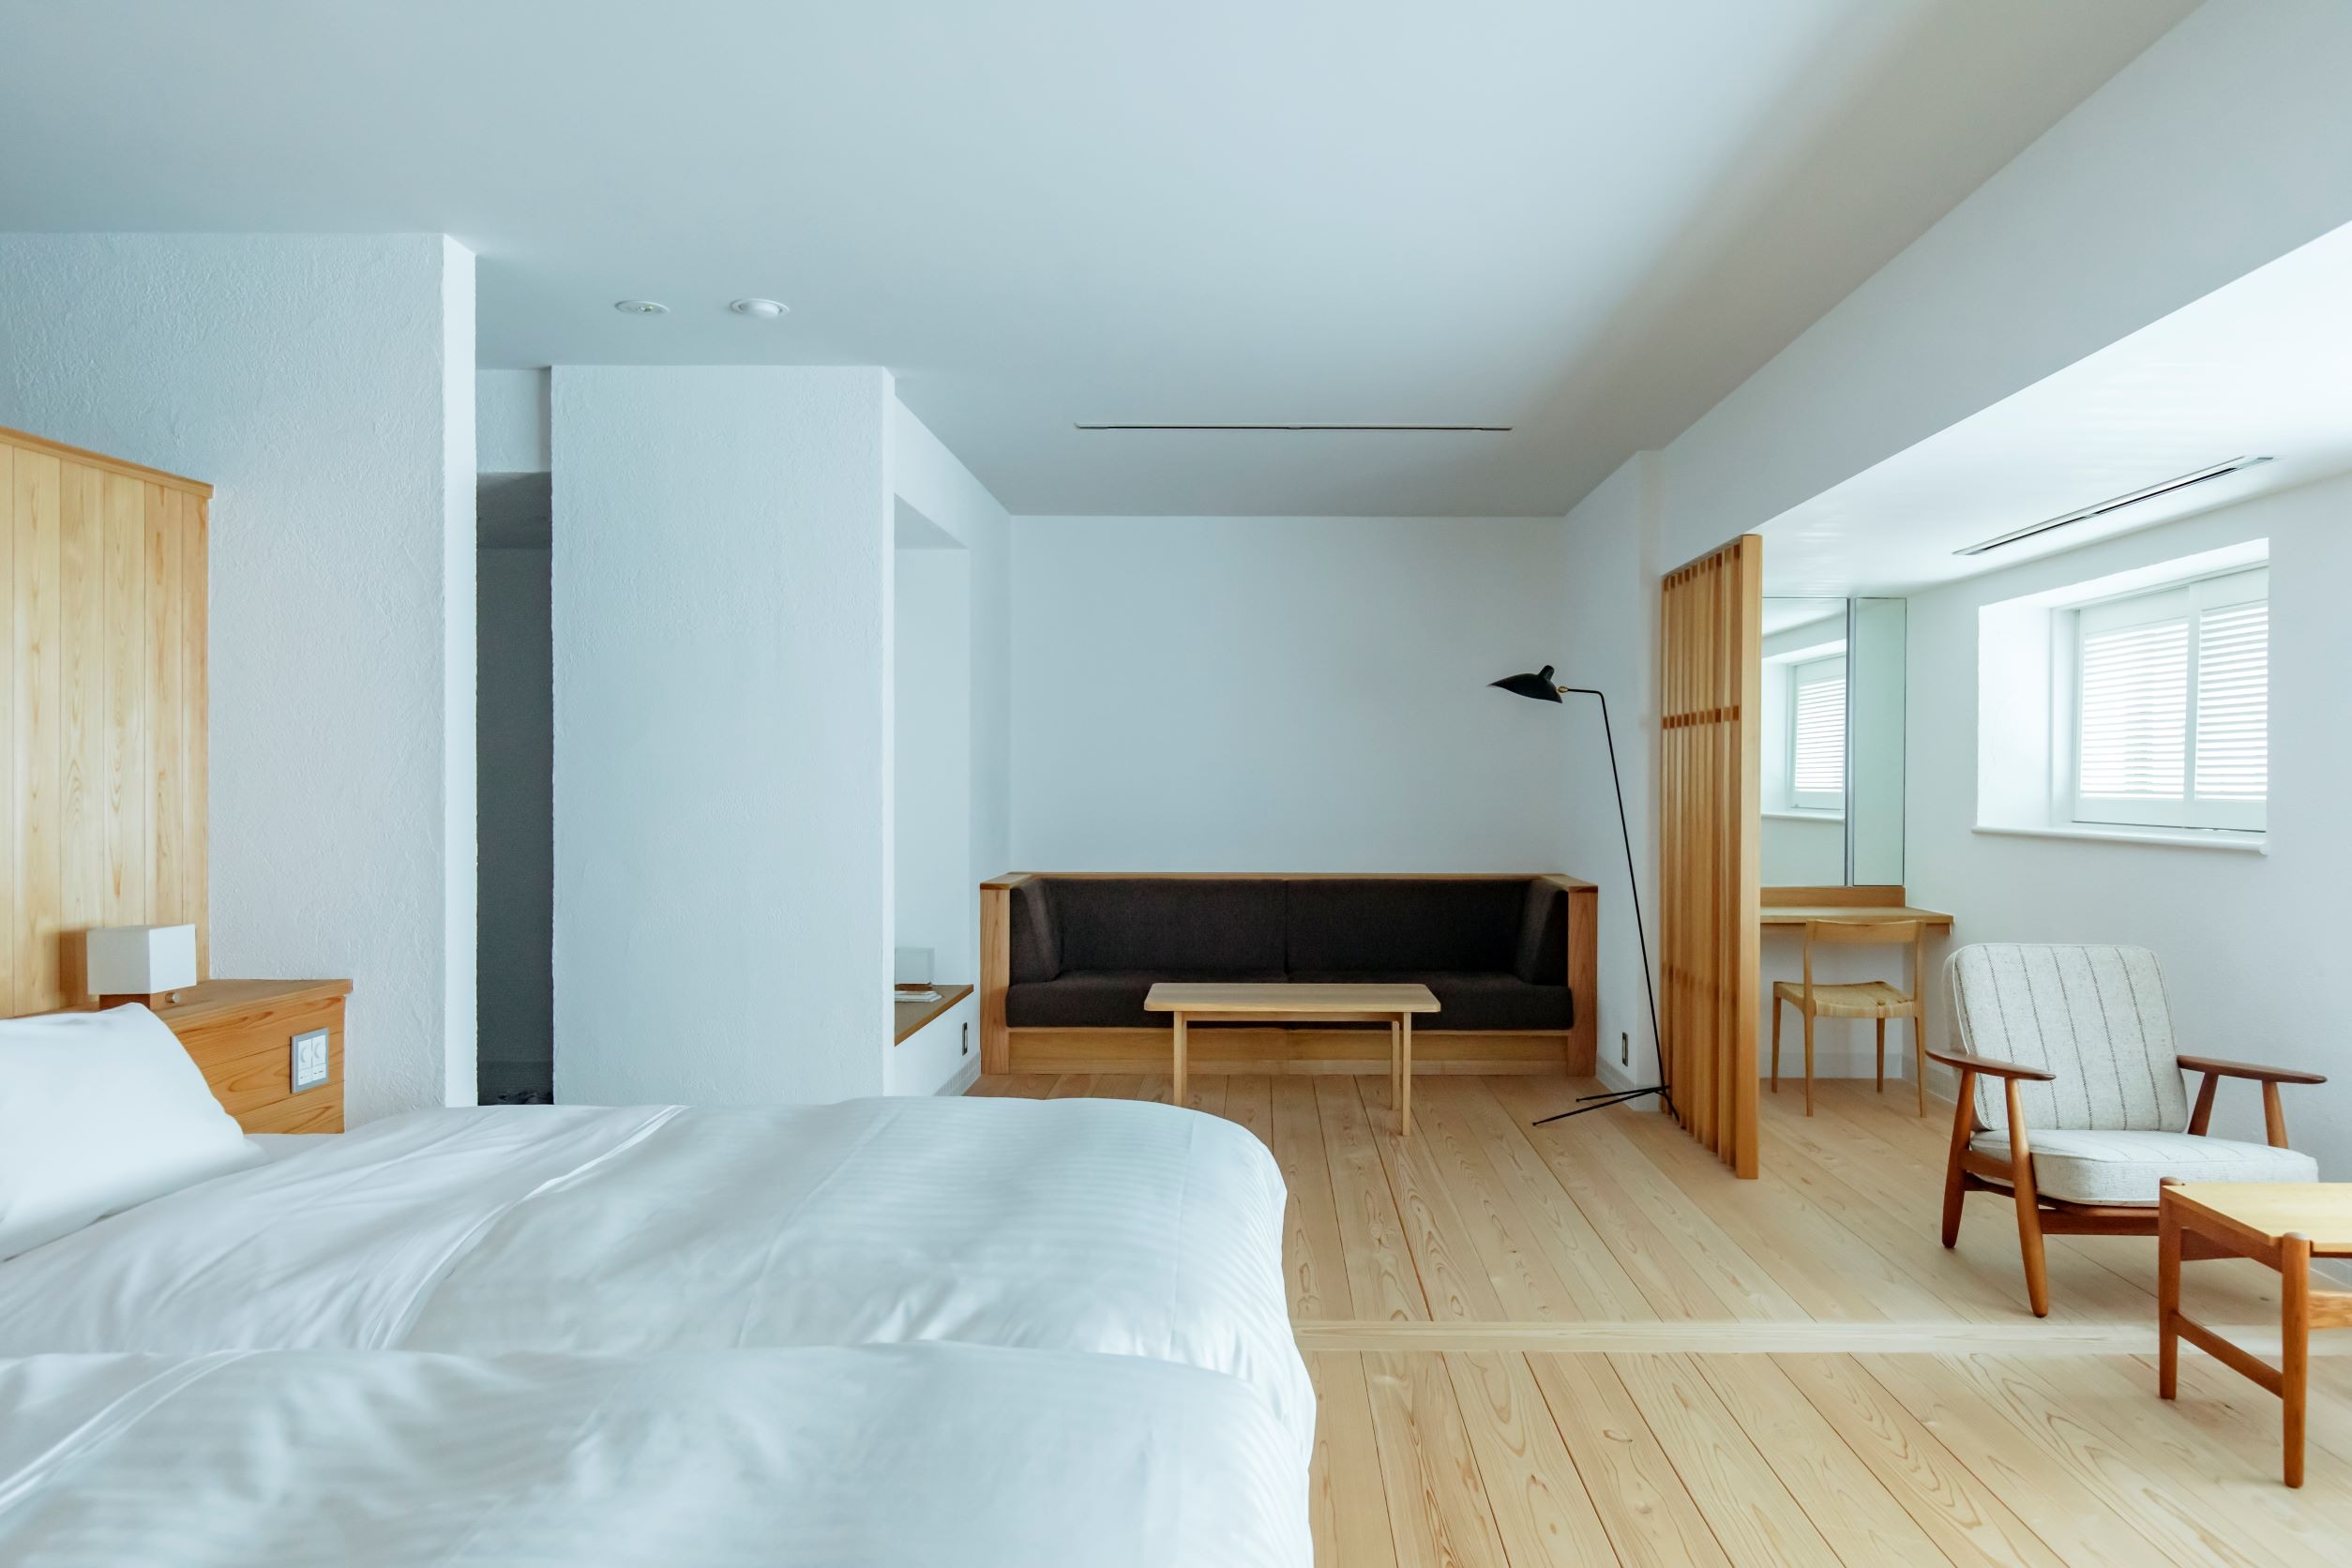 [Special Room / Horai] A special time to relax your heart. Materials such as solid wood floors and plaster walls gently envelop the resident.